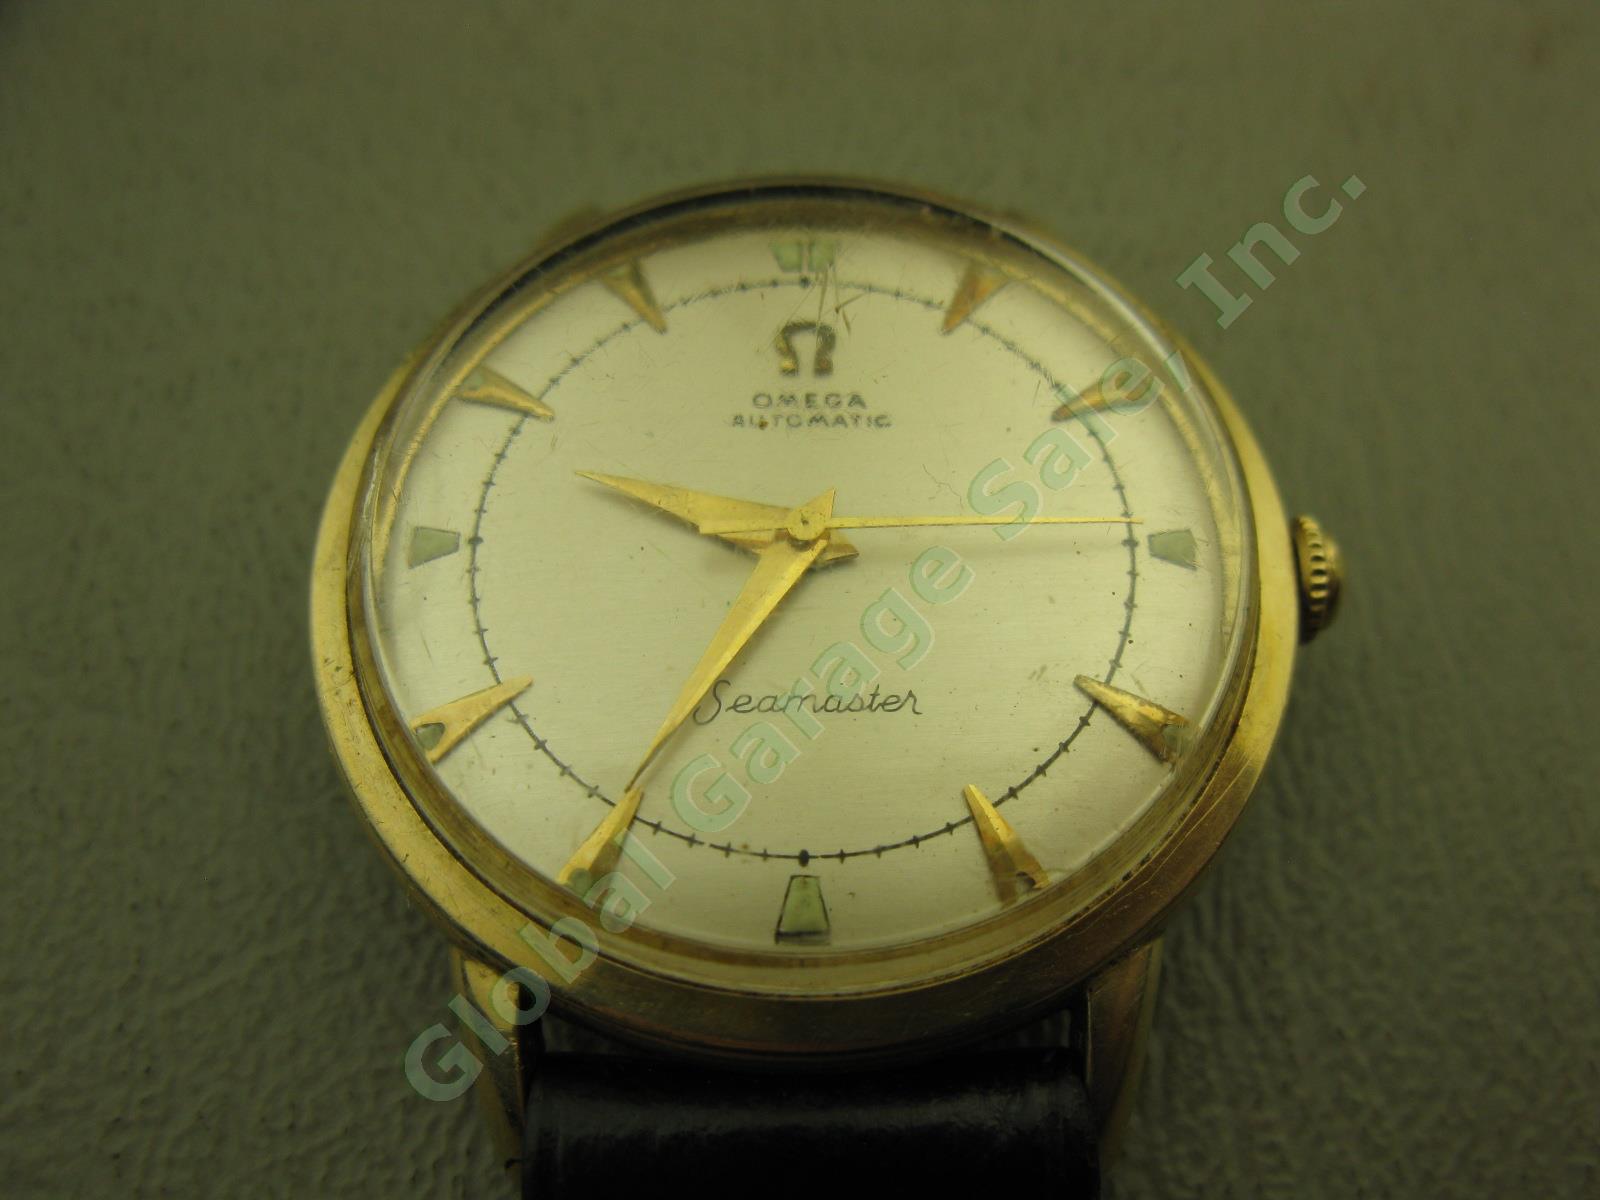 Vtg 1948 Omega Seamaster 14k Gold Automatic Bumper Swiss Watch Serial # 11118734